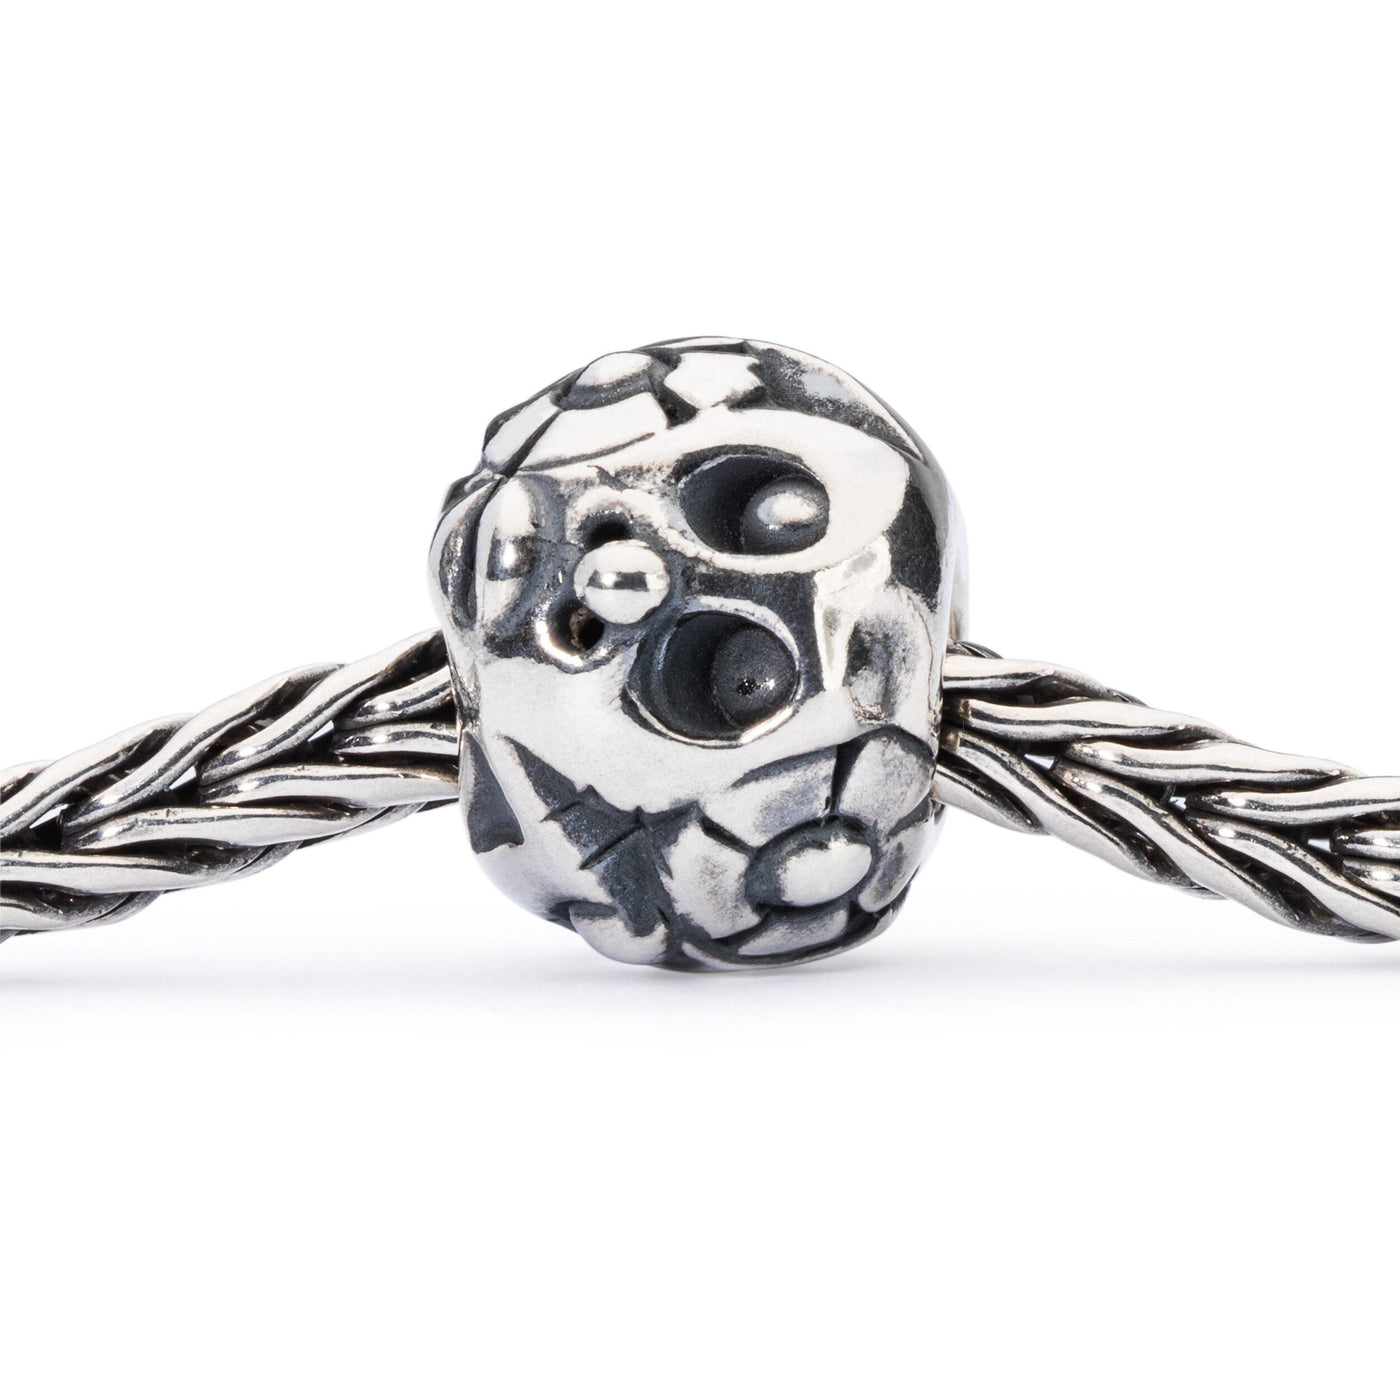 Guardian of Nature - Trollbeads Canada